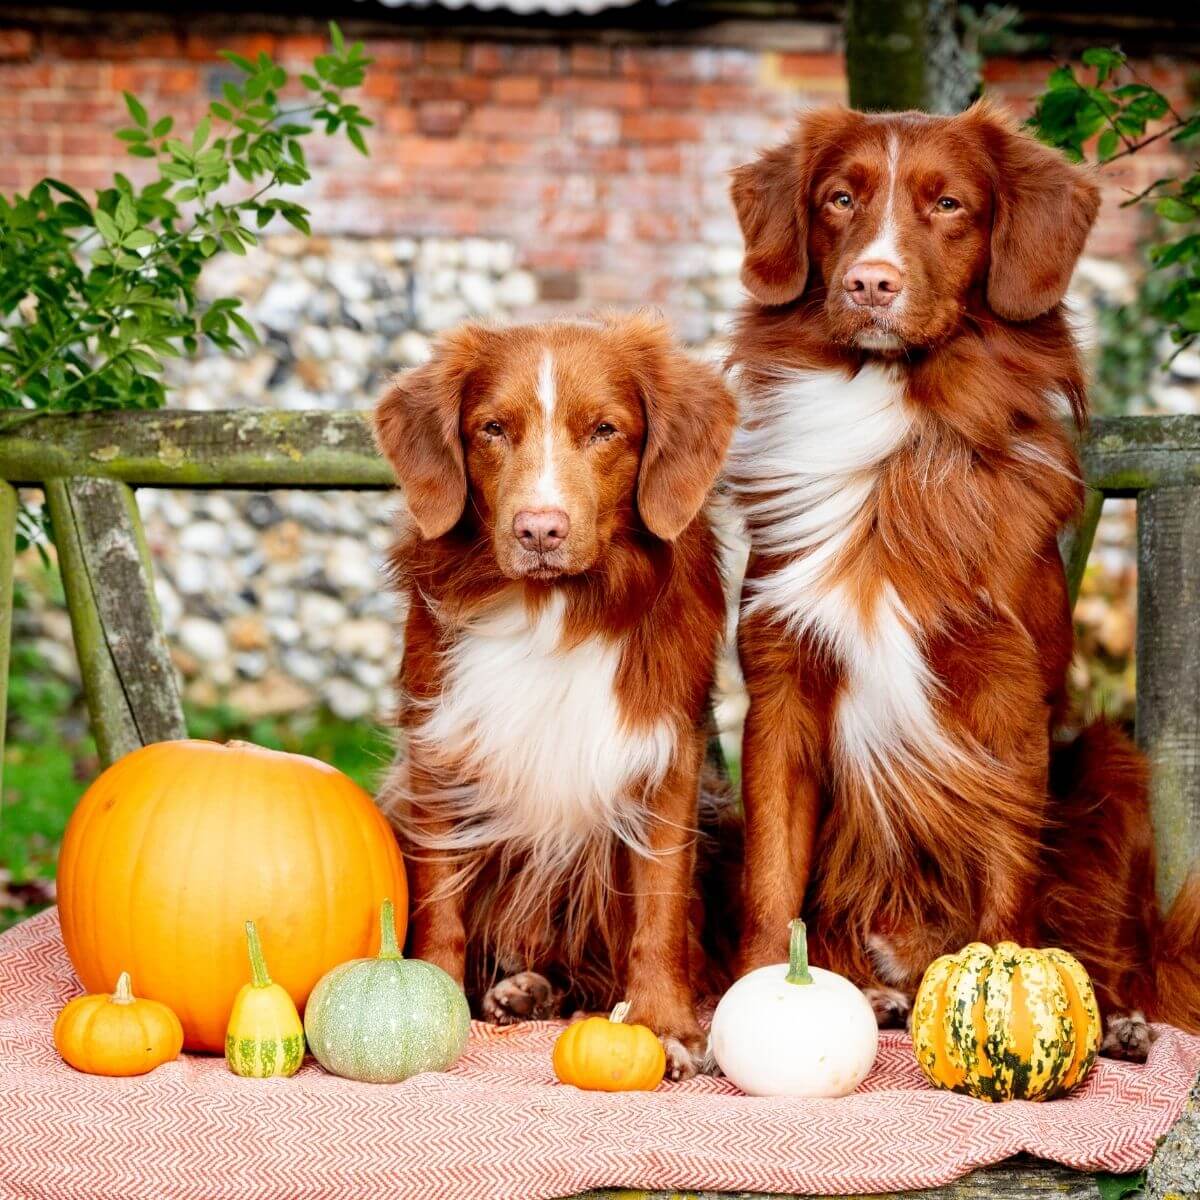 6 Health Benefits of Pumpkin for Dogs